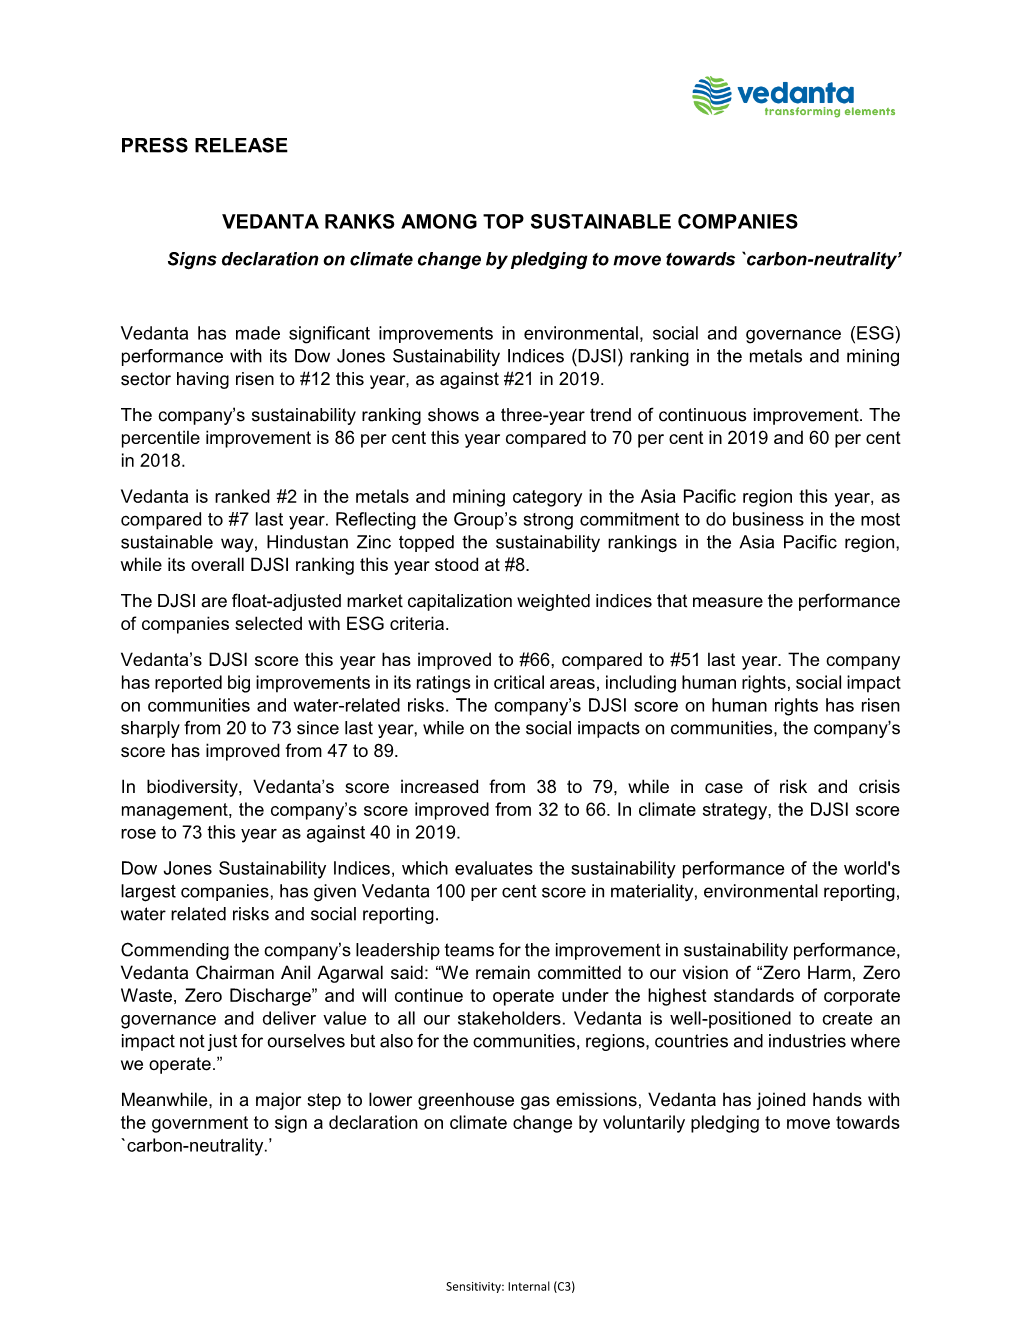 Press Release Vedanta Ranks Among Top Sustainable